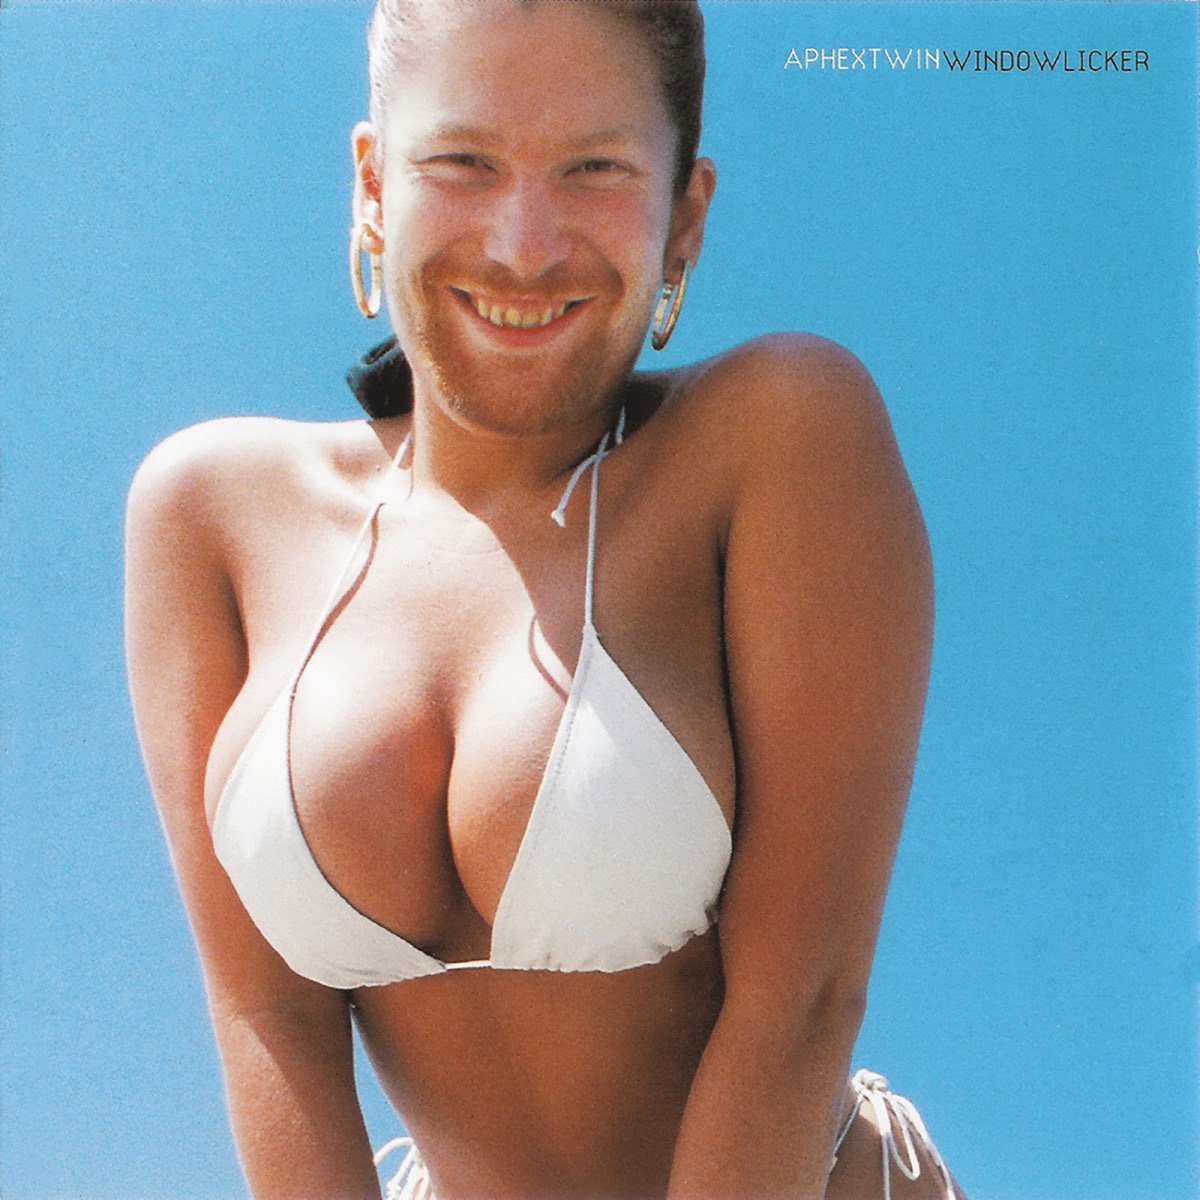 “Windowlicker” b/w 'ΔMi−1 = −αΣn=1NDi[n] [Σj∈C[i]Fji[n − 1] + Fexti[n−1]]” came out 25 years ago today ꩜